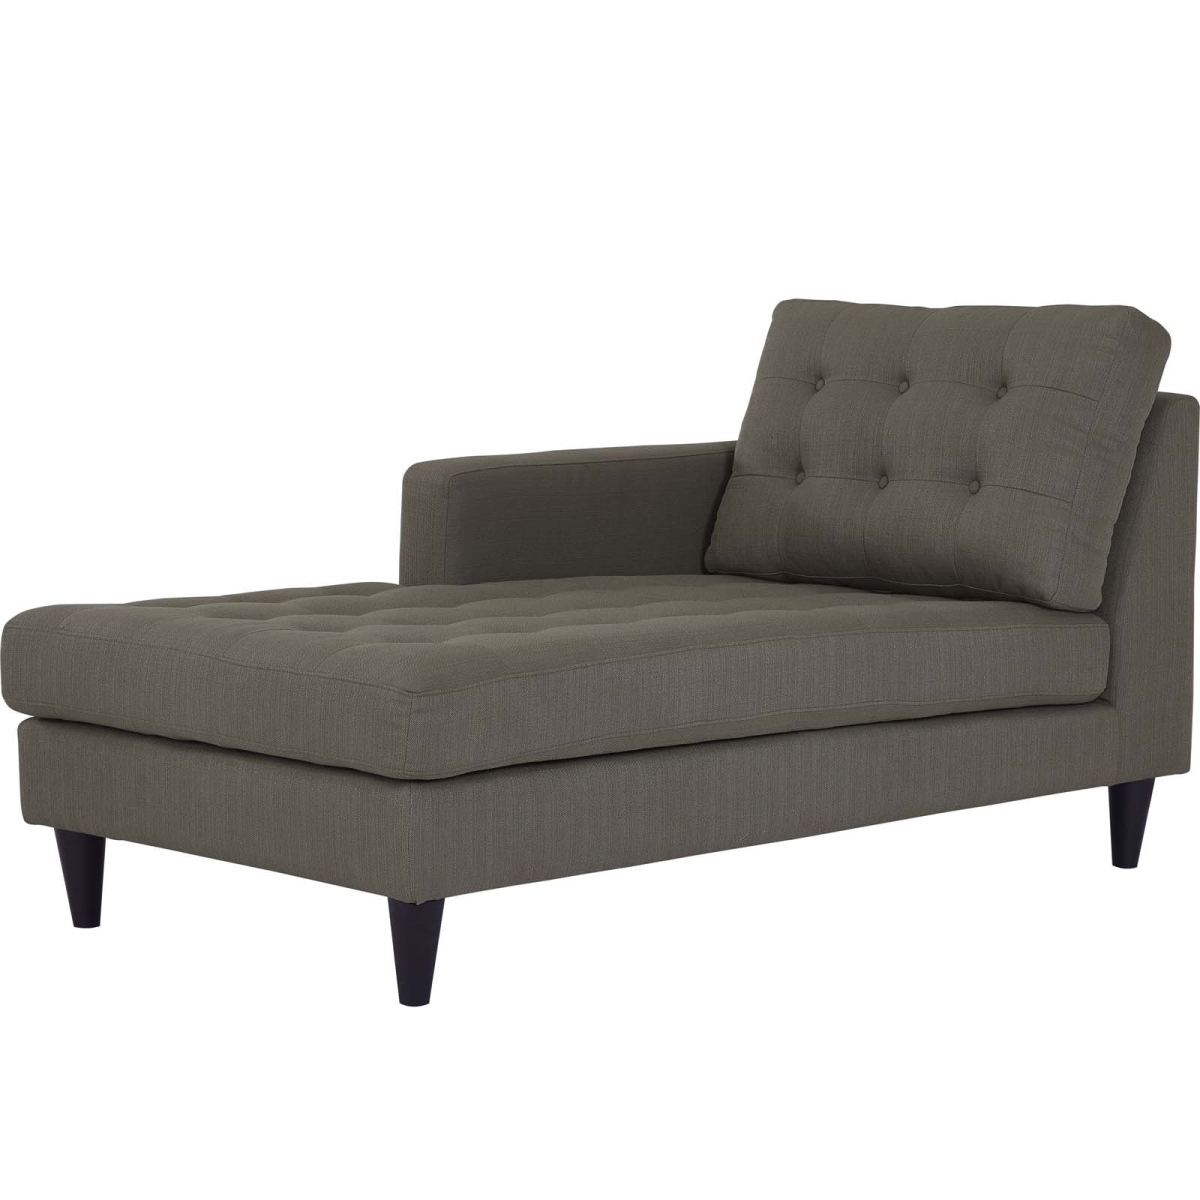 Modway Eei-2596-gra 35.5 H X 35.0 W X 63.5 L In. Empress Left-arm Upholstered Fabric Chaise, Gray